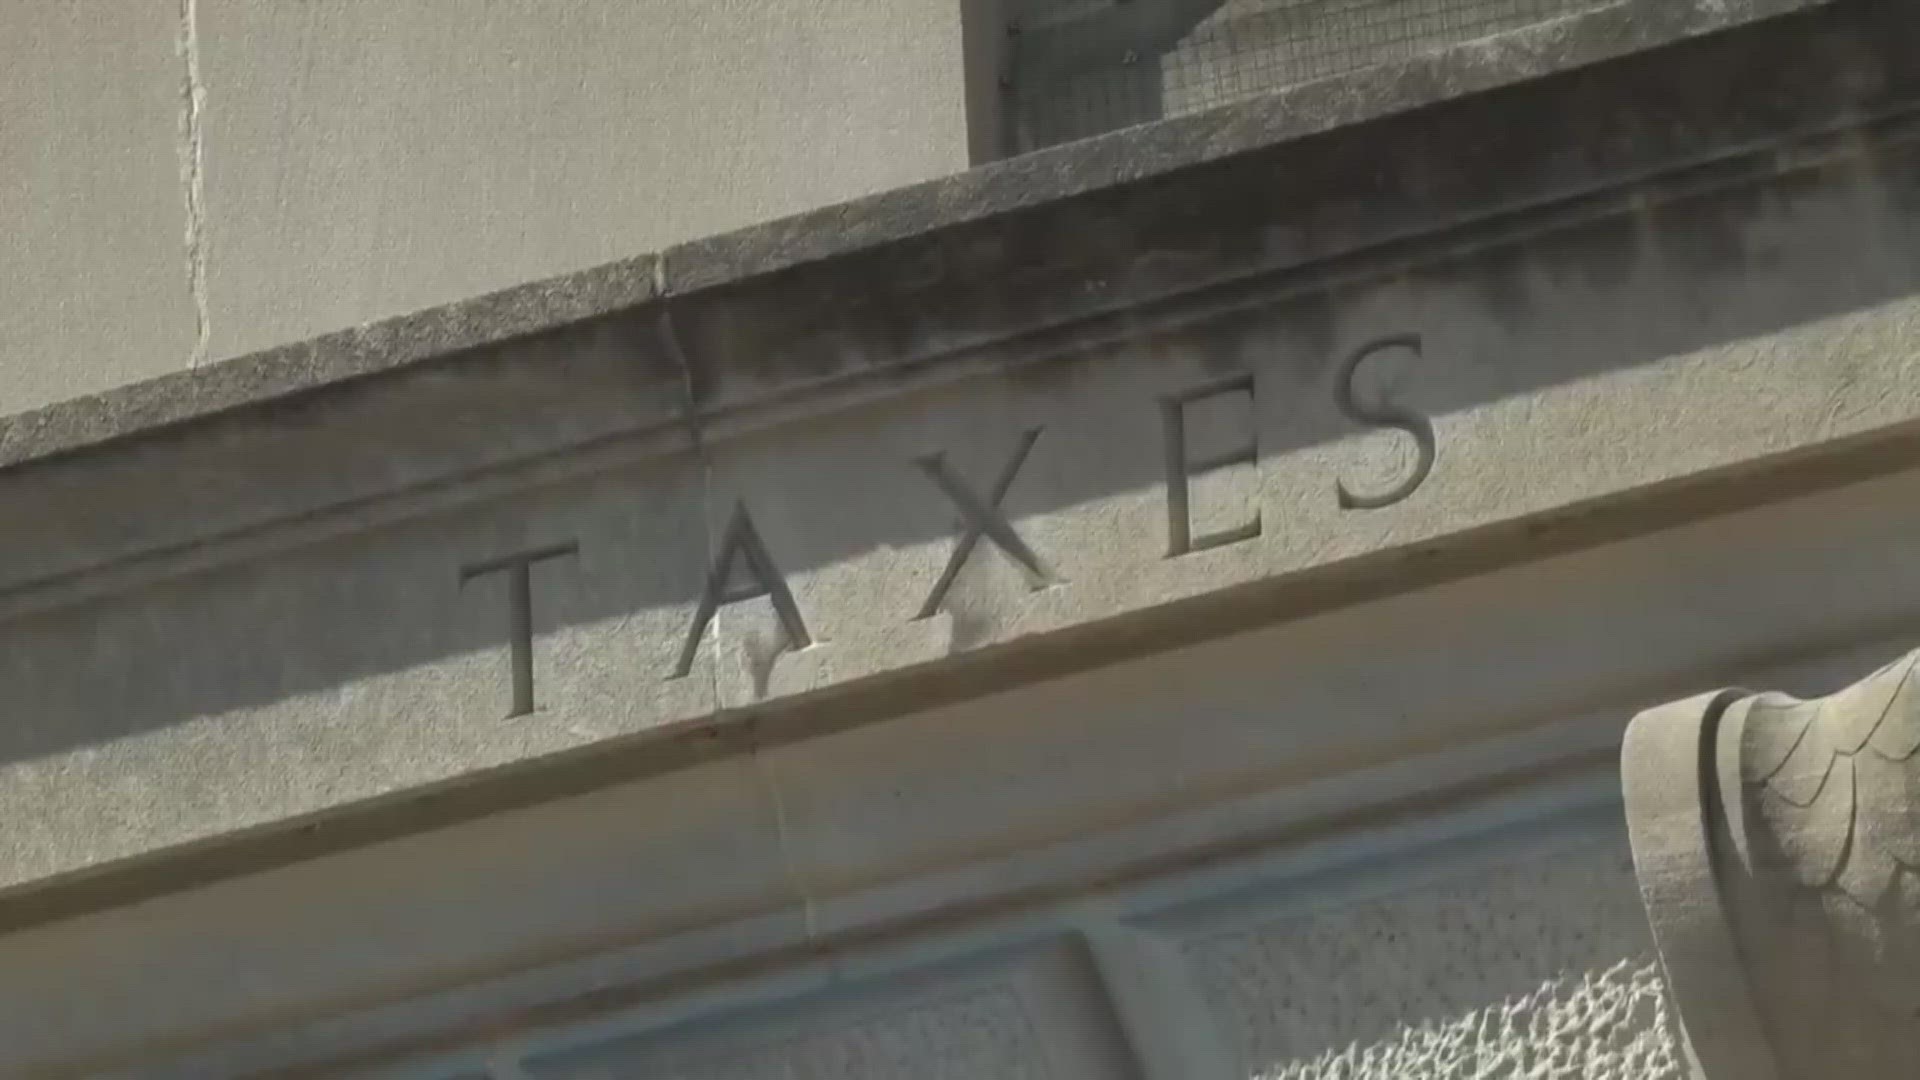 Taxes must be filed by April 15,  but what happens if you miss the deadline?